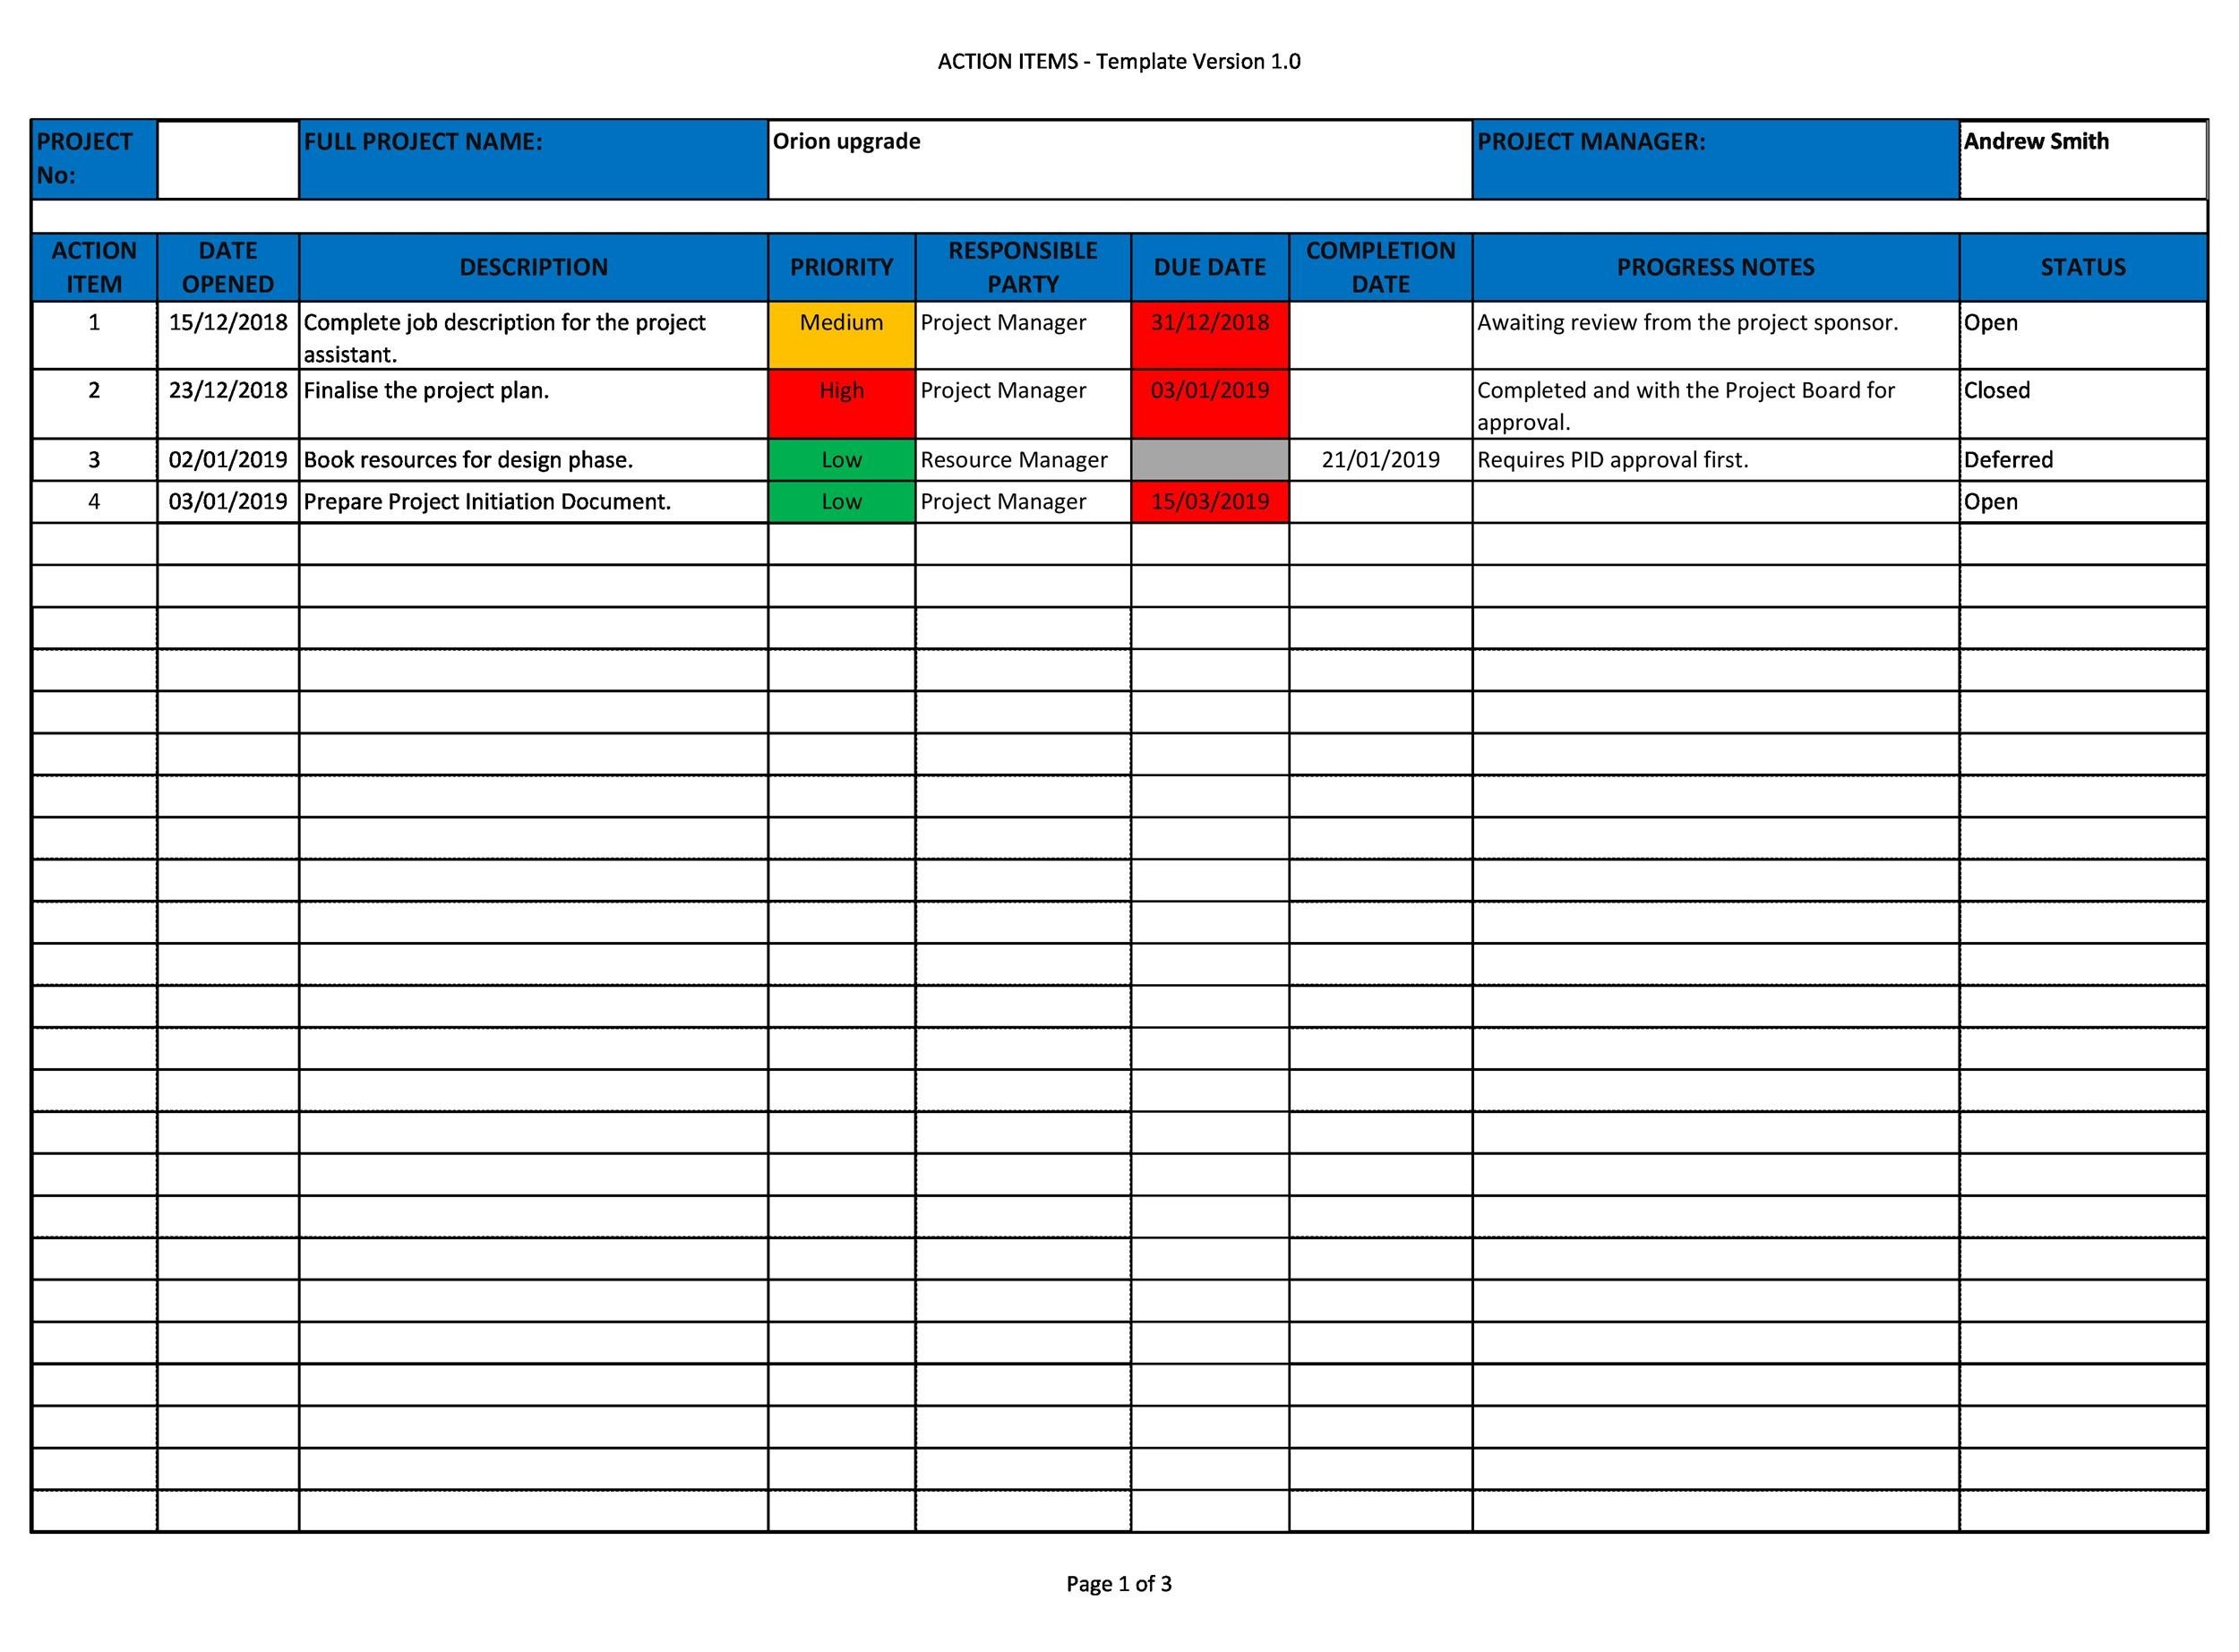 49 Great Action Item Templates (MS Word Excel) ᐅ TemplateLab